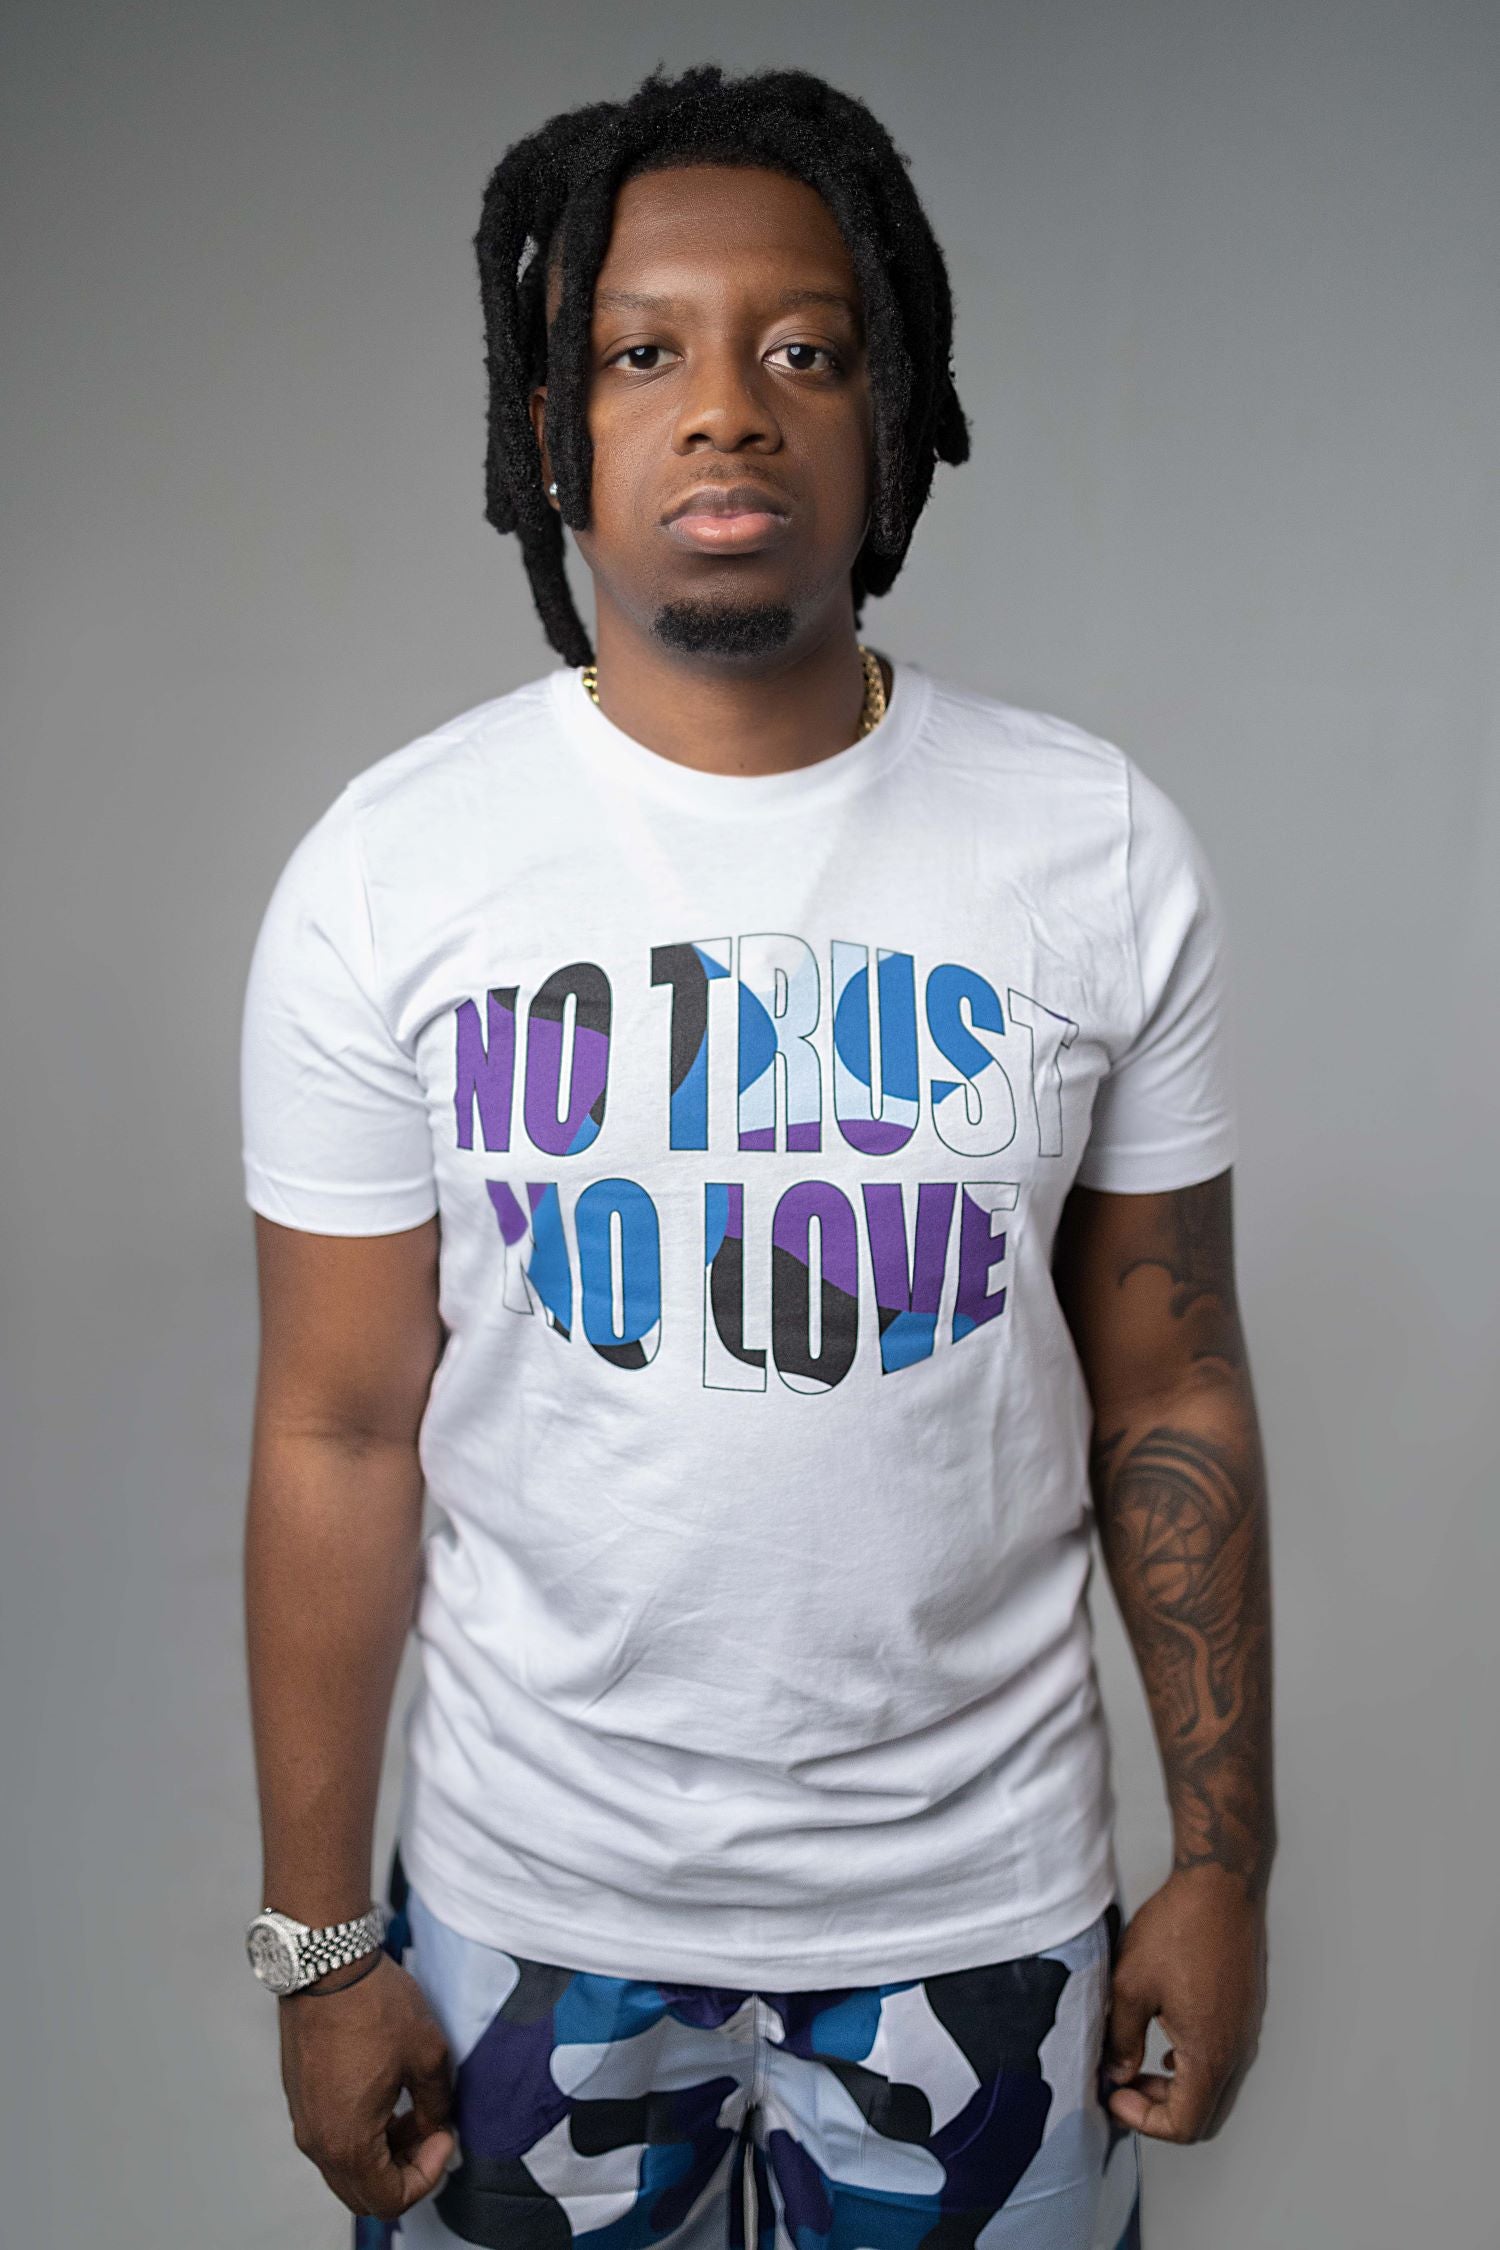 WHITE TSHIRT WITH LARGE BLUE CAMO ROUNDED "NO TRUST NO LOVE" PRINT ACROSS AT FRONT.